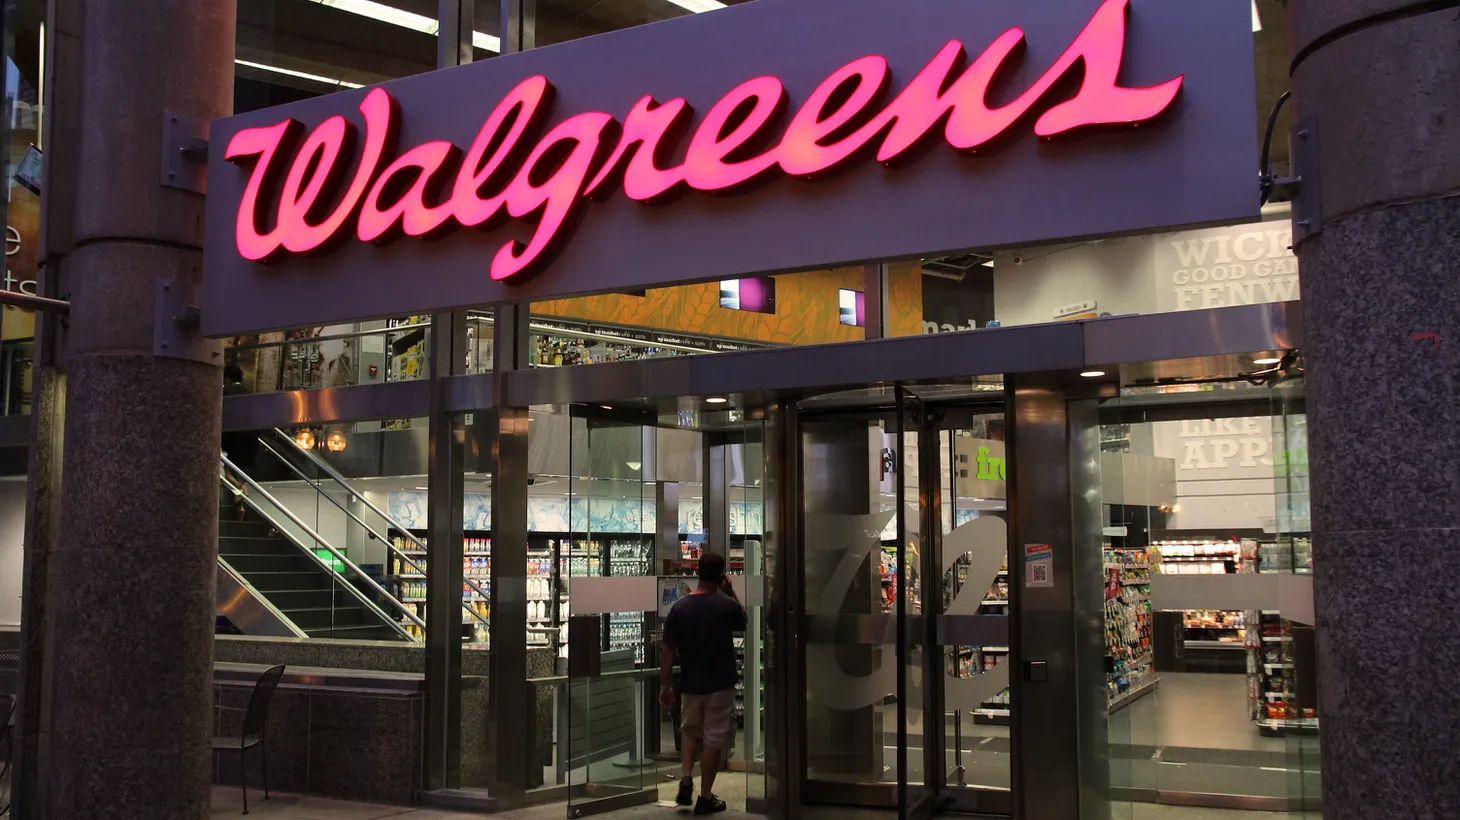 People walk by a Walgreens, owned by the Walgreens Boots Alliance, Inc.